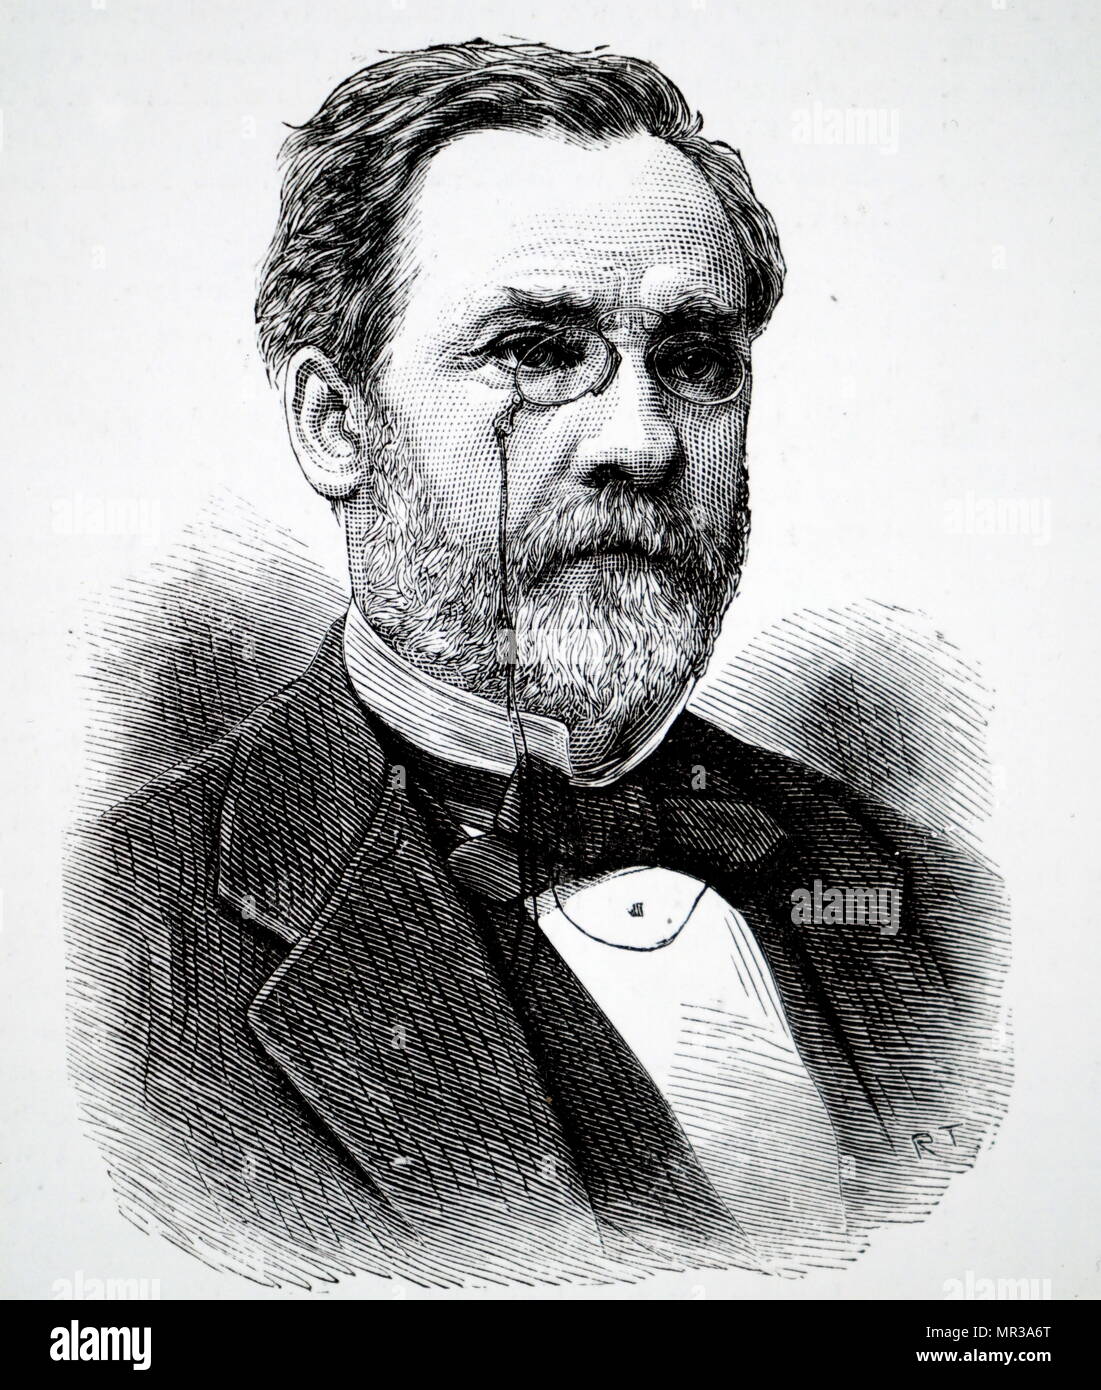 Portrait of Louis Pasteur (1822-1895) a French biologist, microbiologist and chemist renowned for his discoveries of the principles of vaccination, microbial fermentation and pasteurisation. Dated 19th century Stock Photo